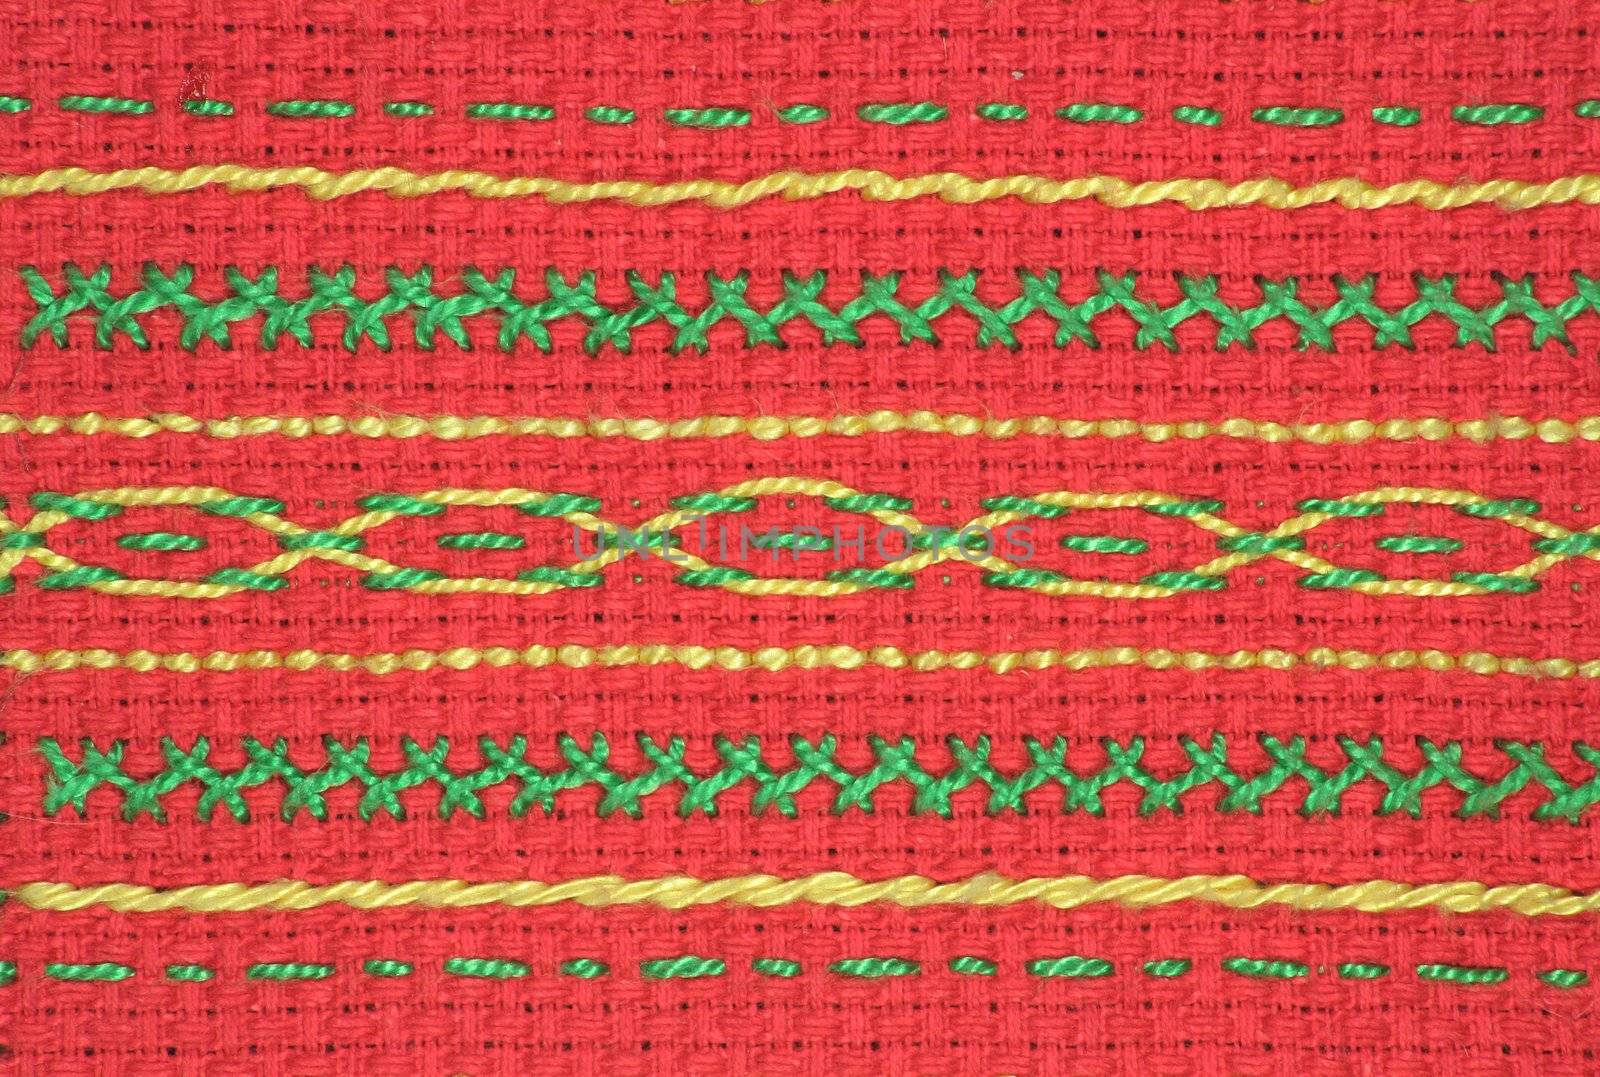 Embroidery by hanhepi